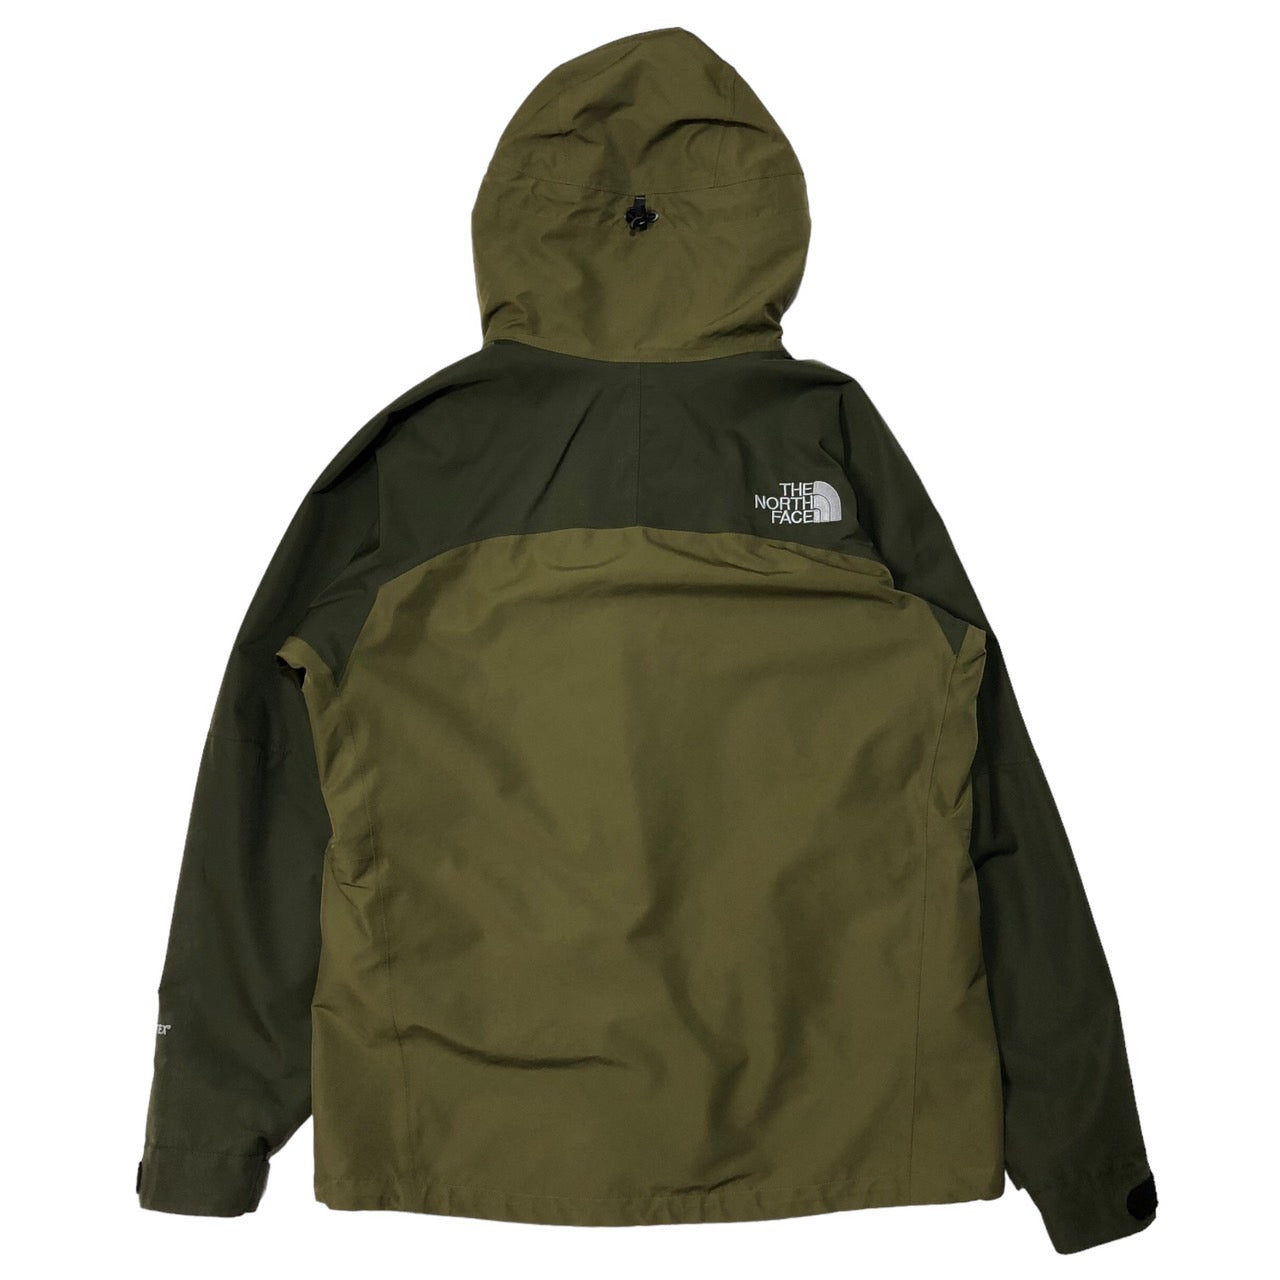 THE NORTH FACE(ザノースフェイス) GORE-TEX PRO SHELL MOUNTAIN ...